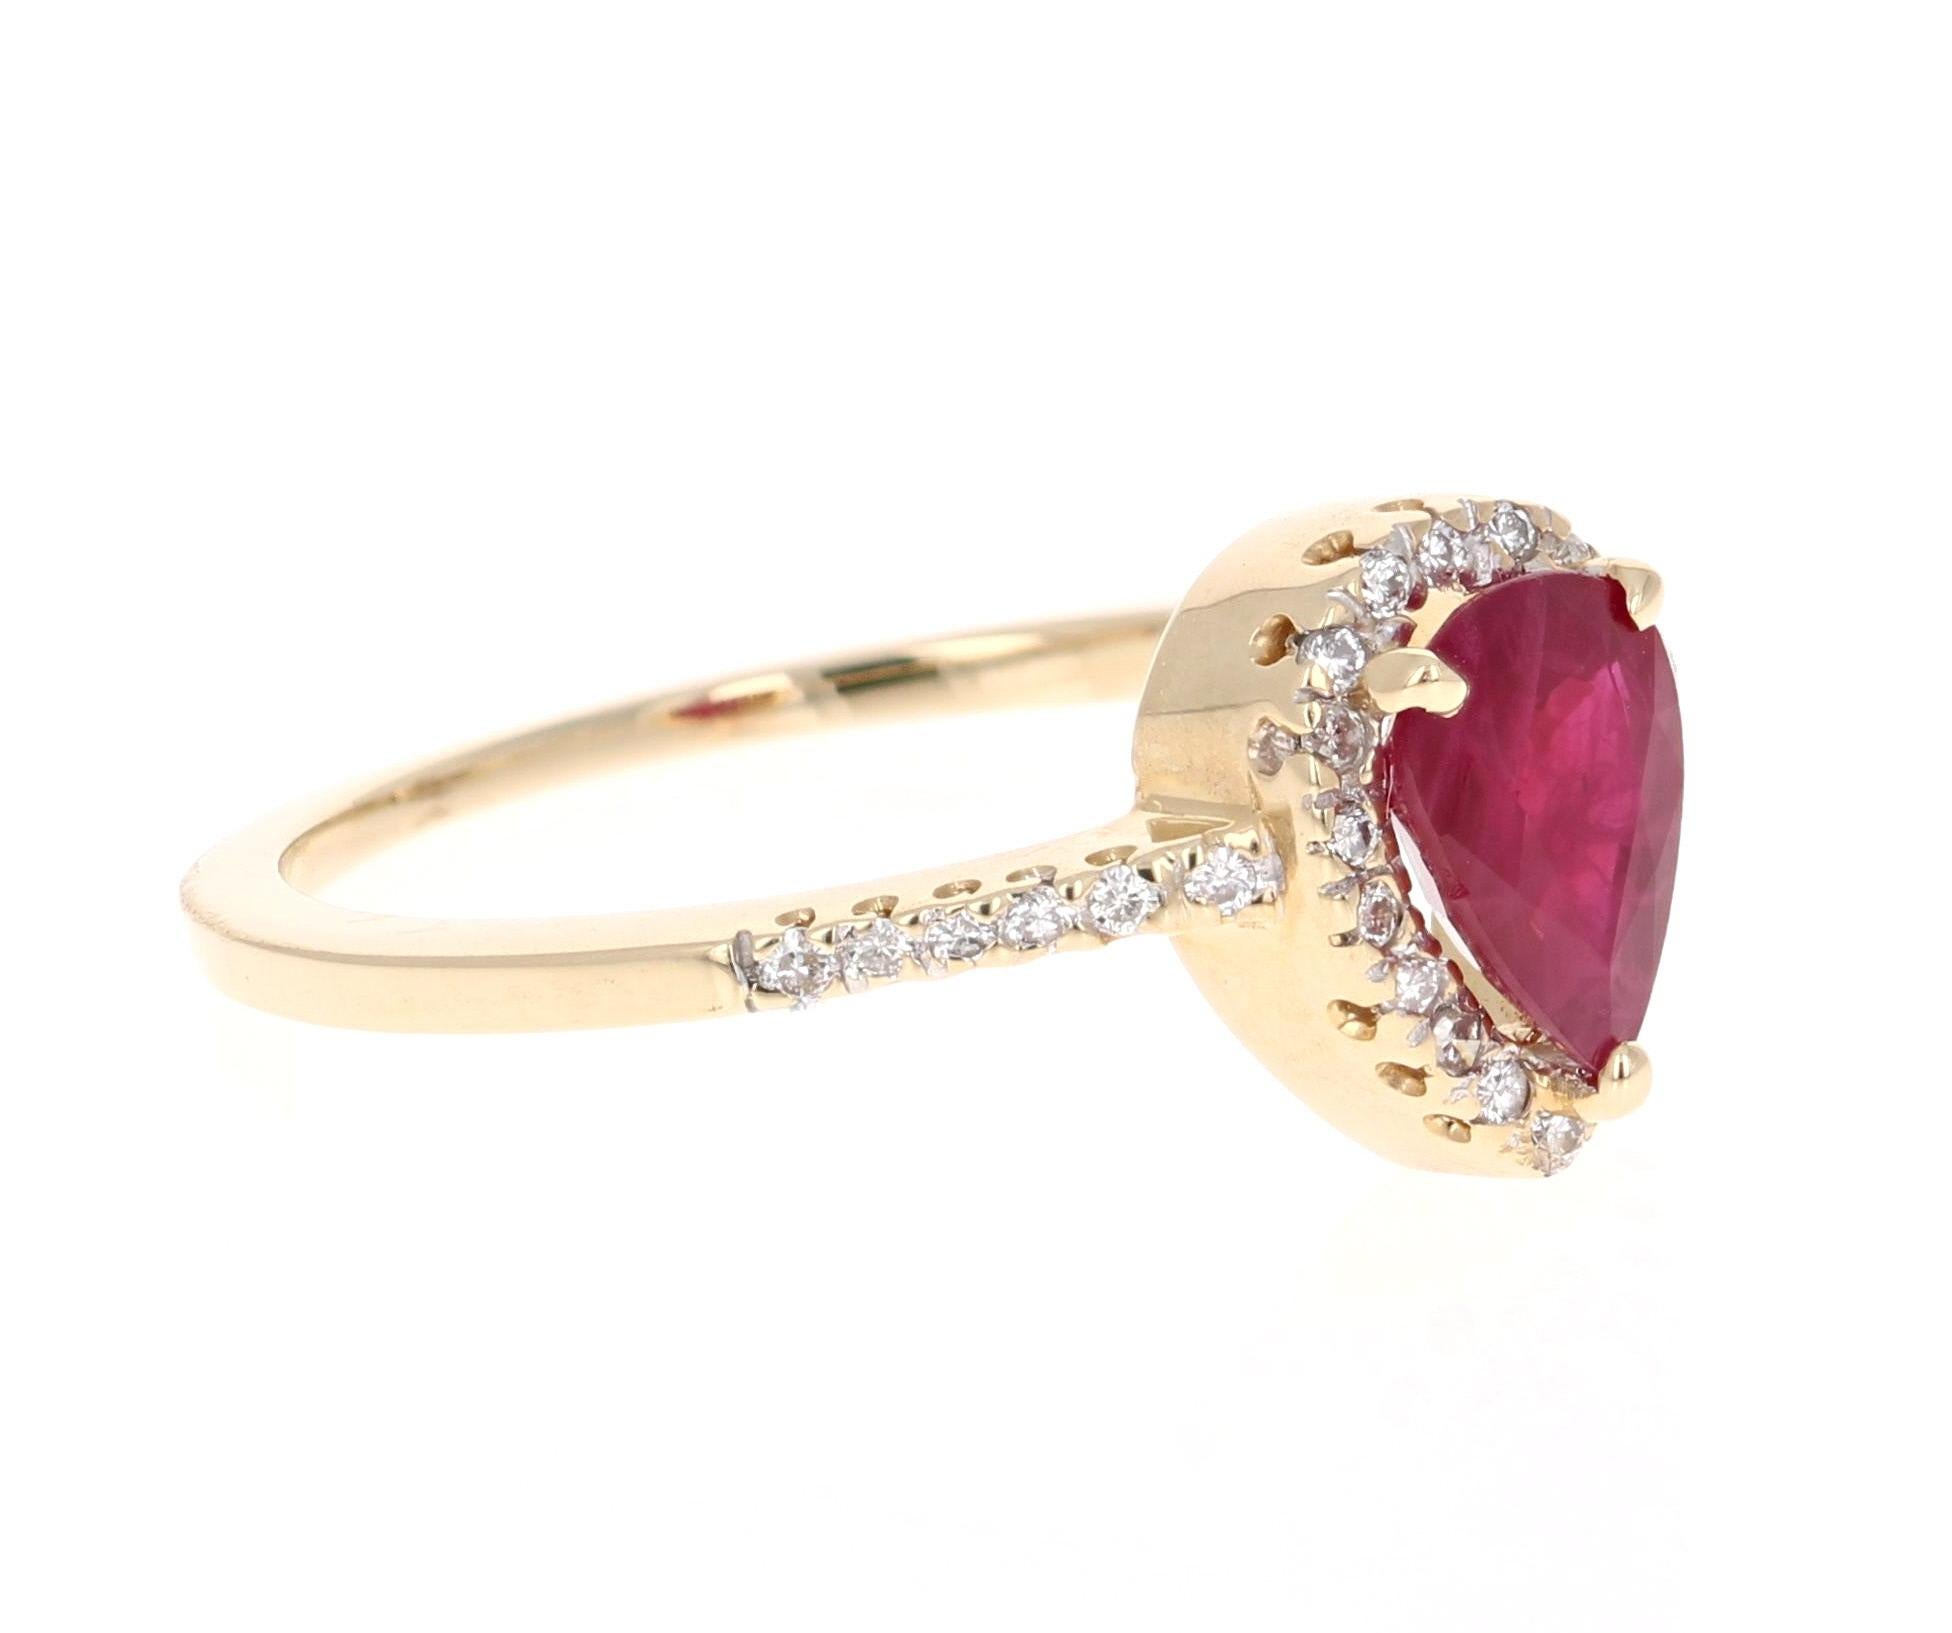 A simple yet beautiful ring with a 0.88 Carat Pear Cut Ruby as its center and 32 Round Cut Diamonds that weigh 0.20 carats. The total carat weight of the ring is 1.08 carats.

The ring is casted in 14K Yellow Gold and weighs approximately 2.4 grams.